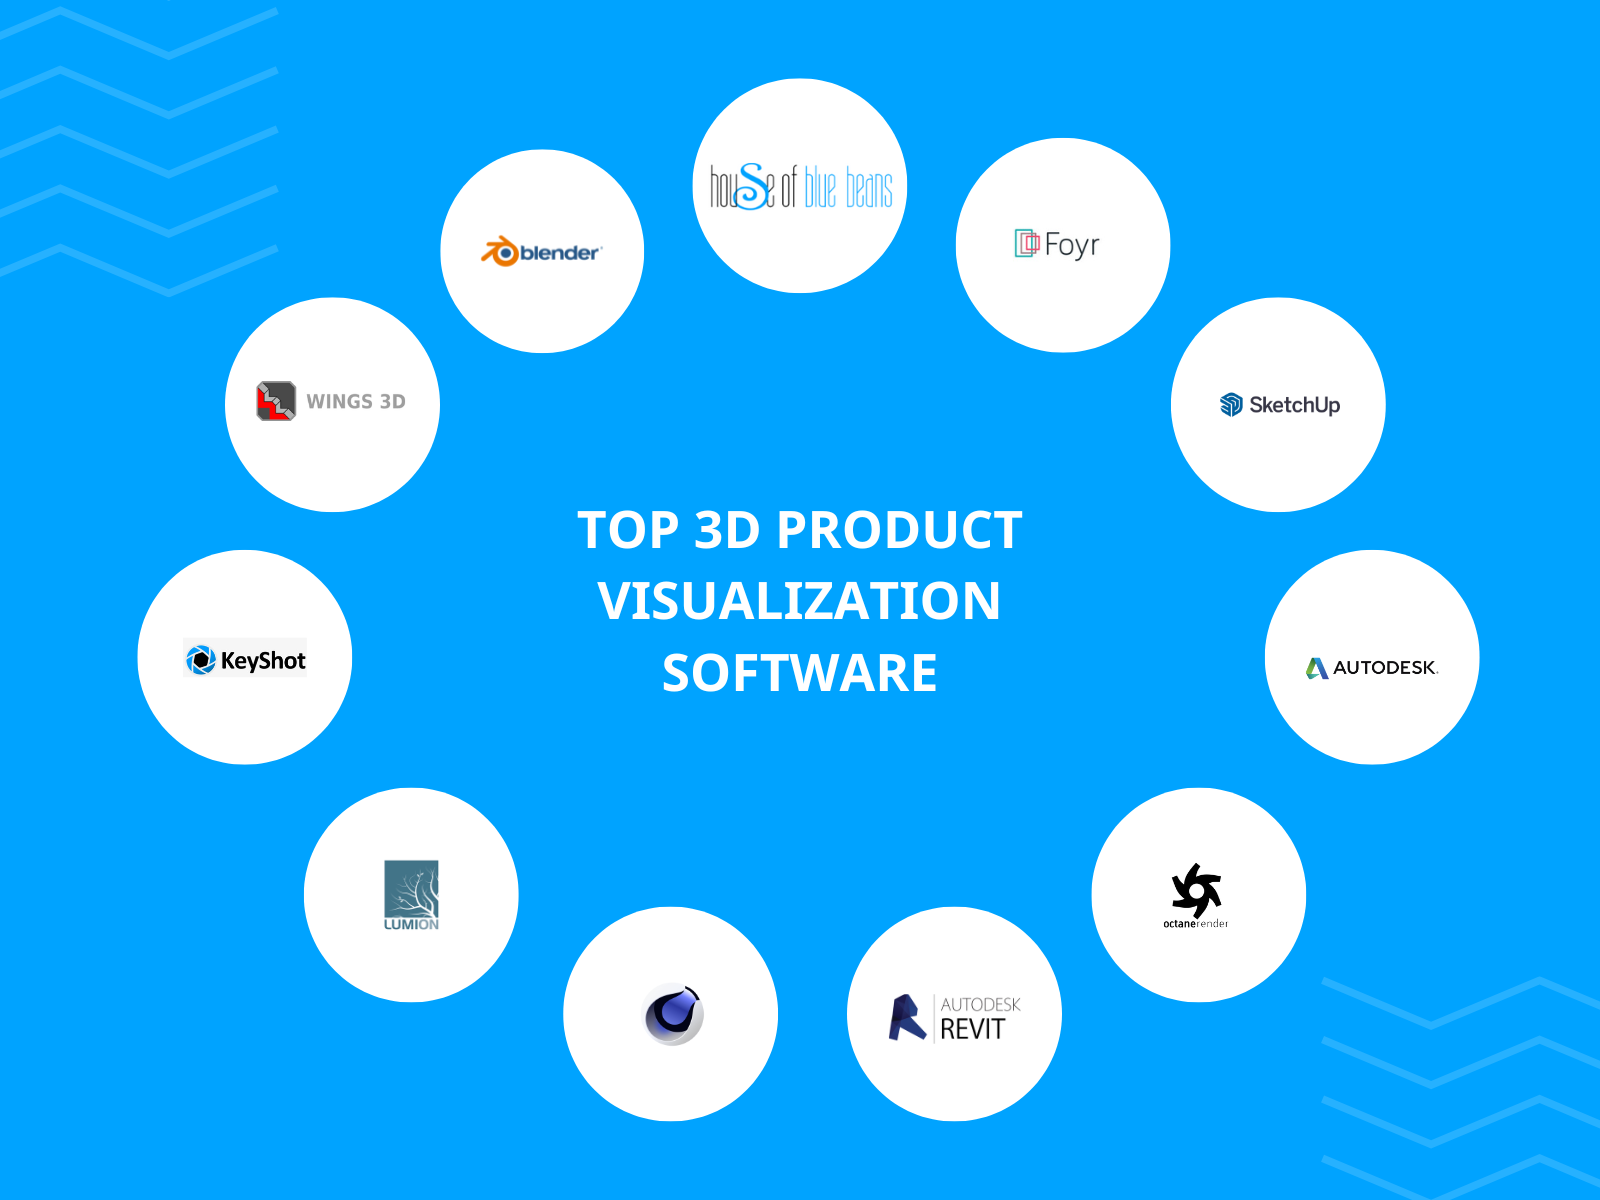 Top 3D Product Visualization Software